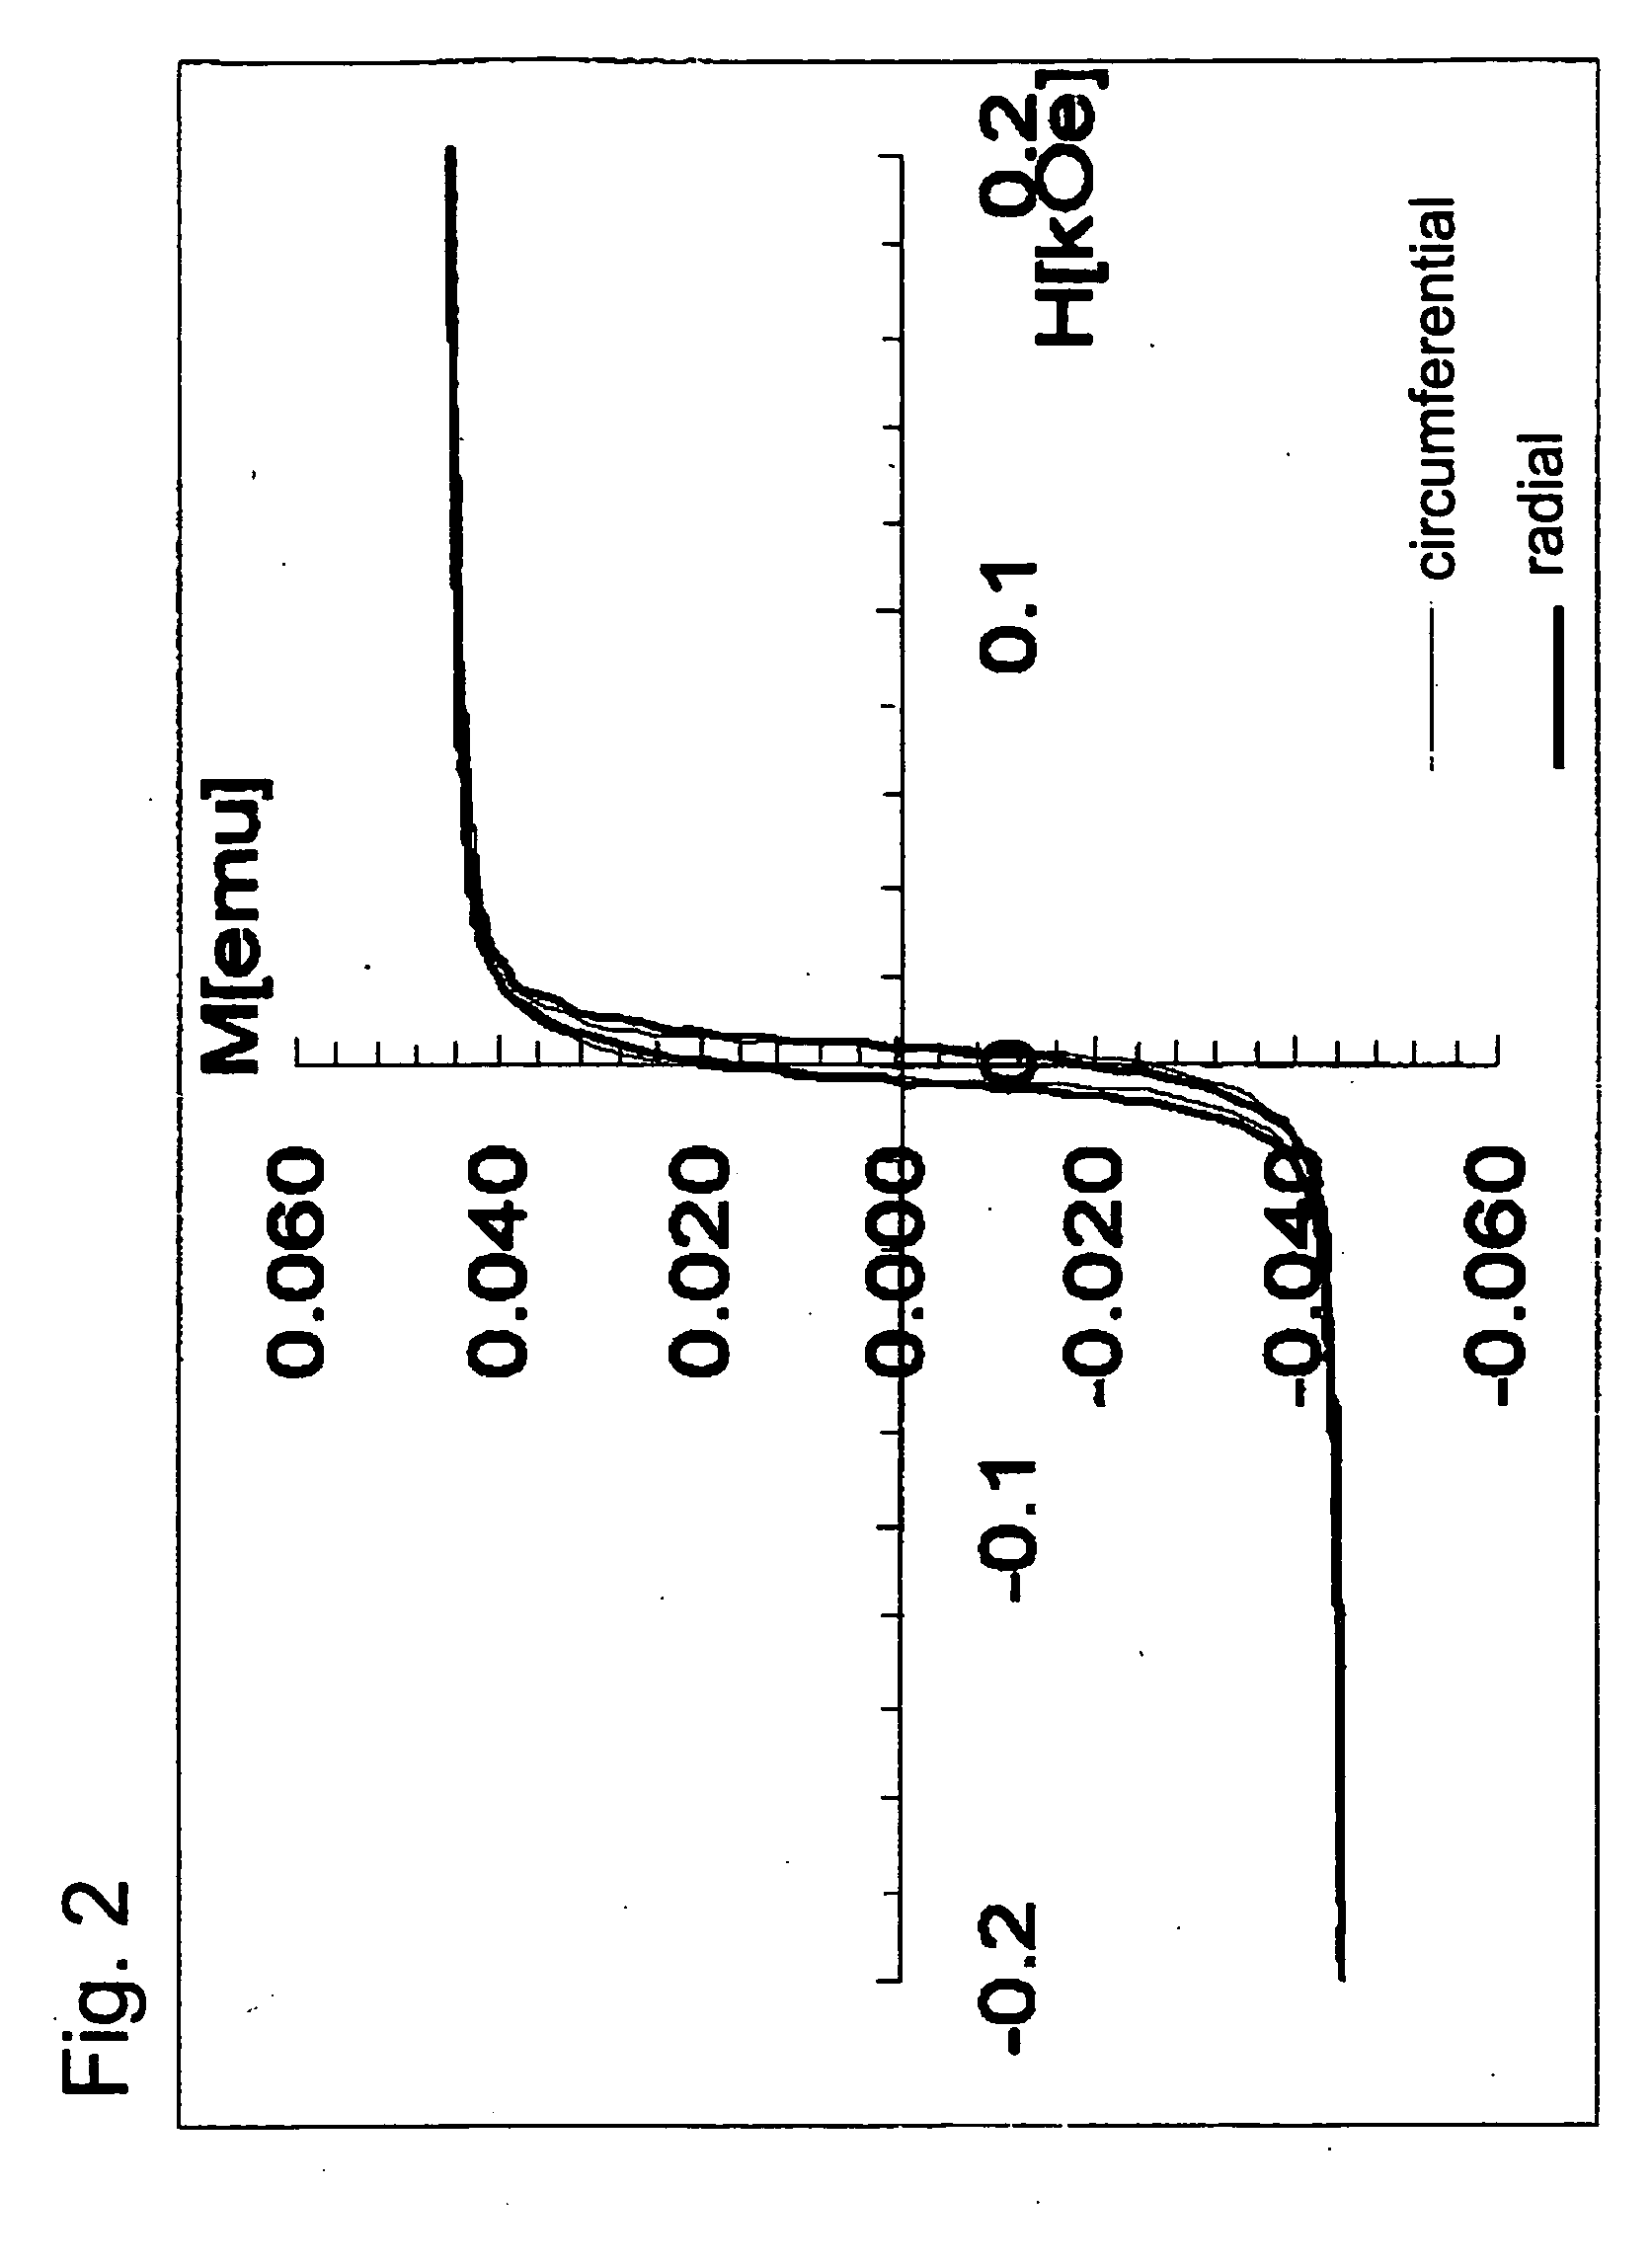 Method of plating on glass substrate and method of manufacturing magnetic recording medium using the method of plating